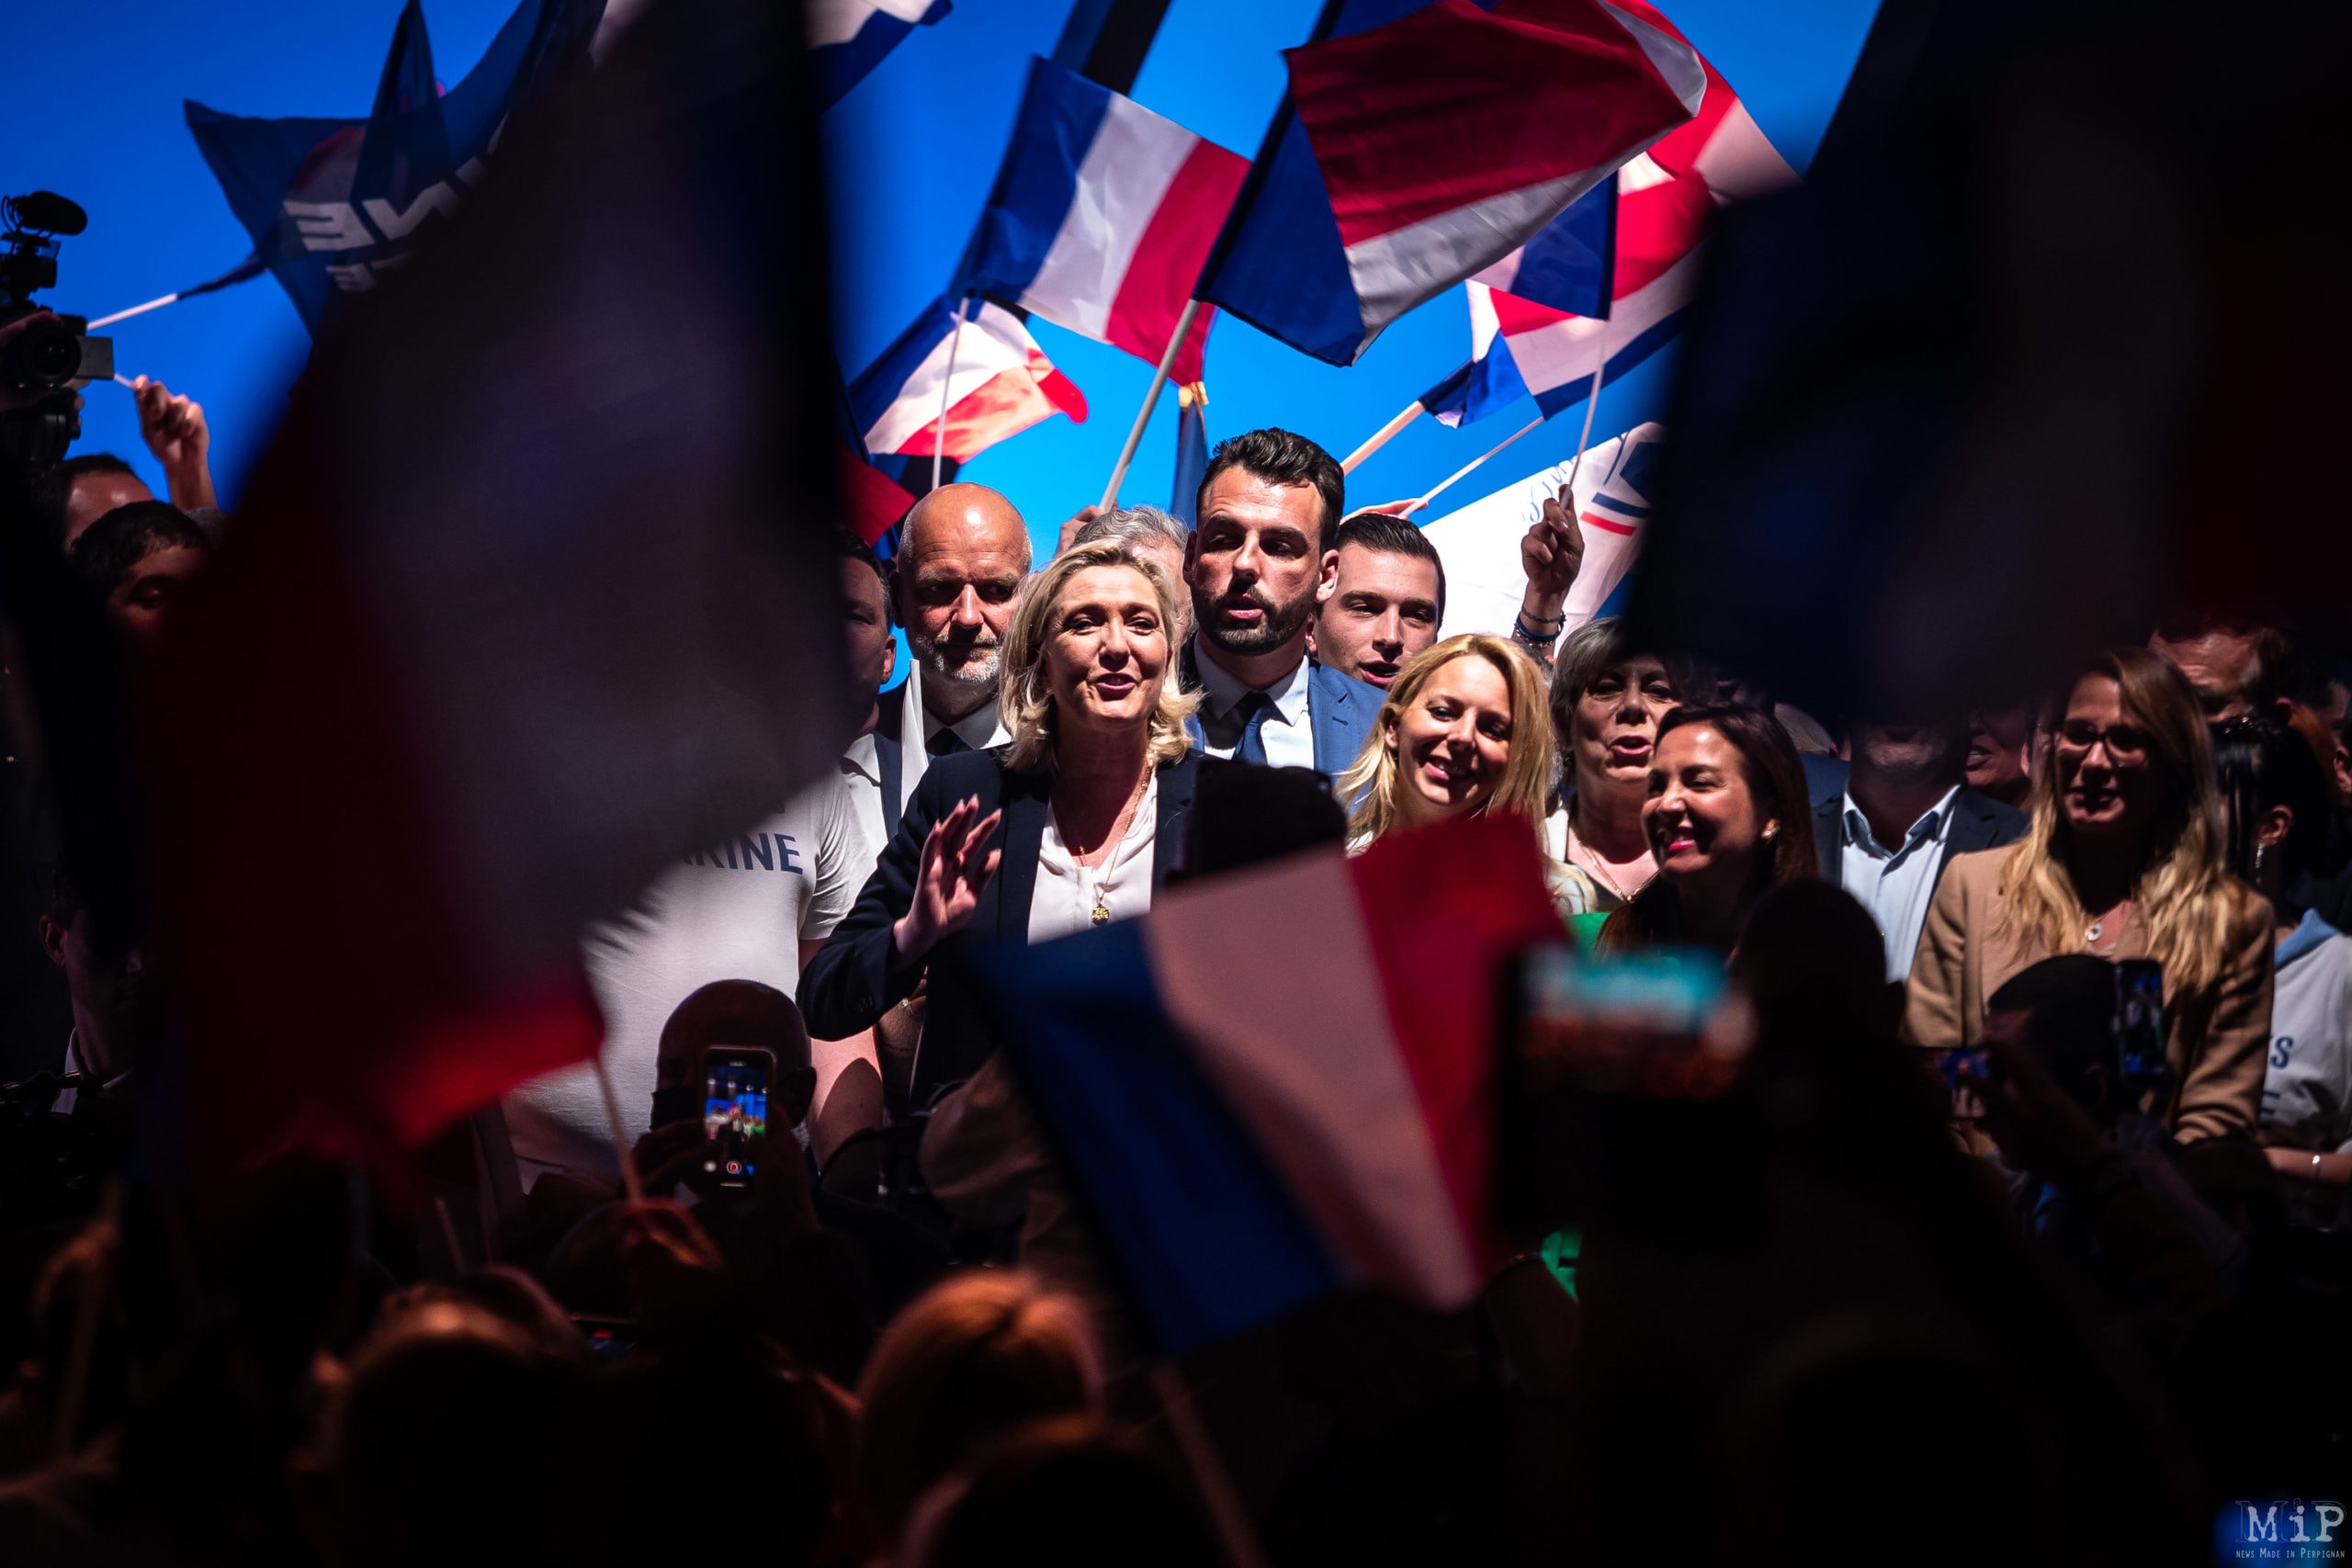 France, Perpignan, 2022-04-07. For her last campaign meeting of the 2022 presidential election, Marine Le Pen chose Perpignan. With four days to go before the first round, the Rassemblement National candidate went to the stronghold of the extreme right-wing mayor Louis Aliot, the only city with more than 100,000 inhabitants won by the RN in the last municipal elections. Photograph by Arnaud Le Vu / Hans Lucas.